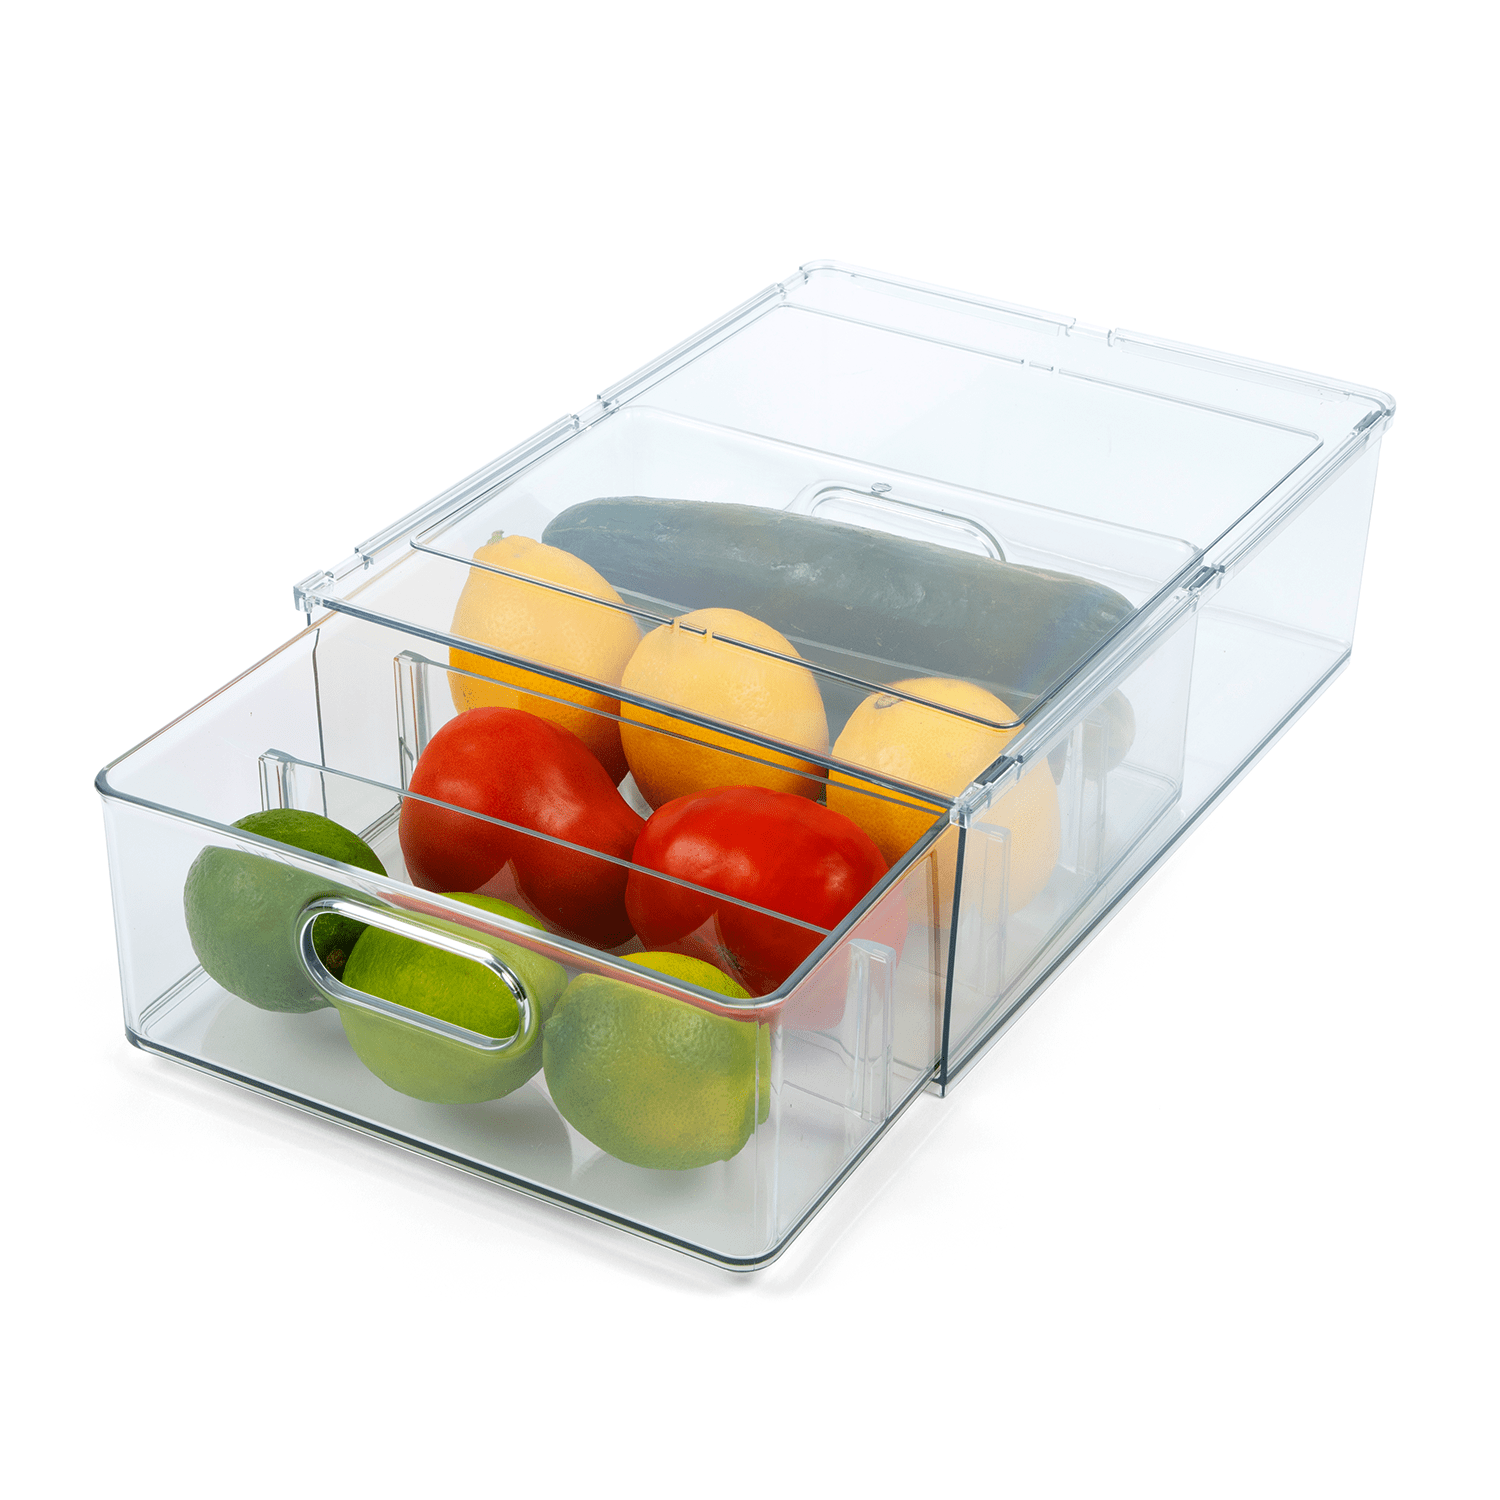 Tidy Tools Refrigerator Organizer Bins with Pull-out Drawer with Handl